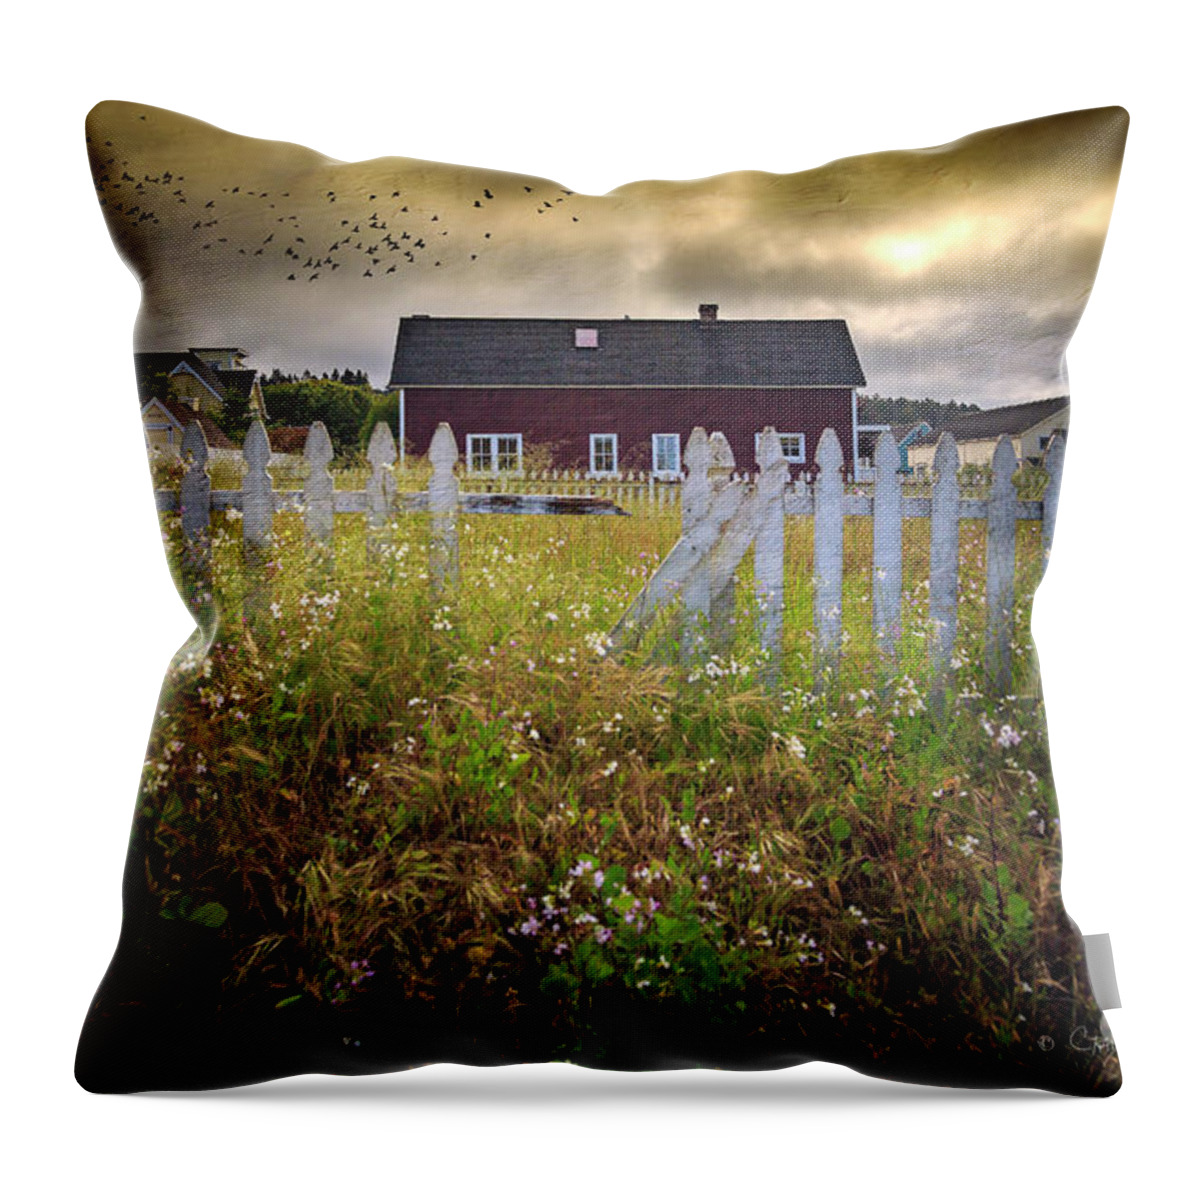 American Throw Pillow featuring the photograph Mendocino Red Barn by Craig J Satterlee